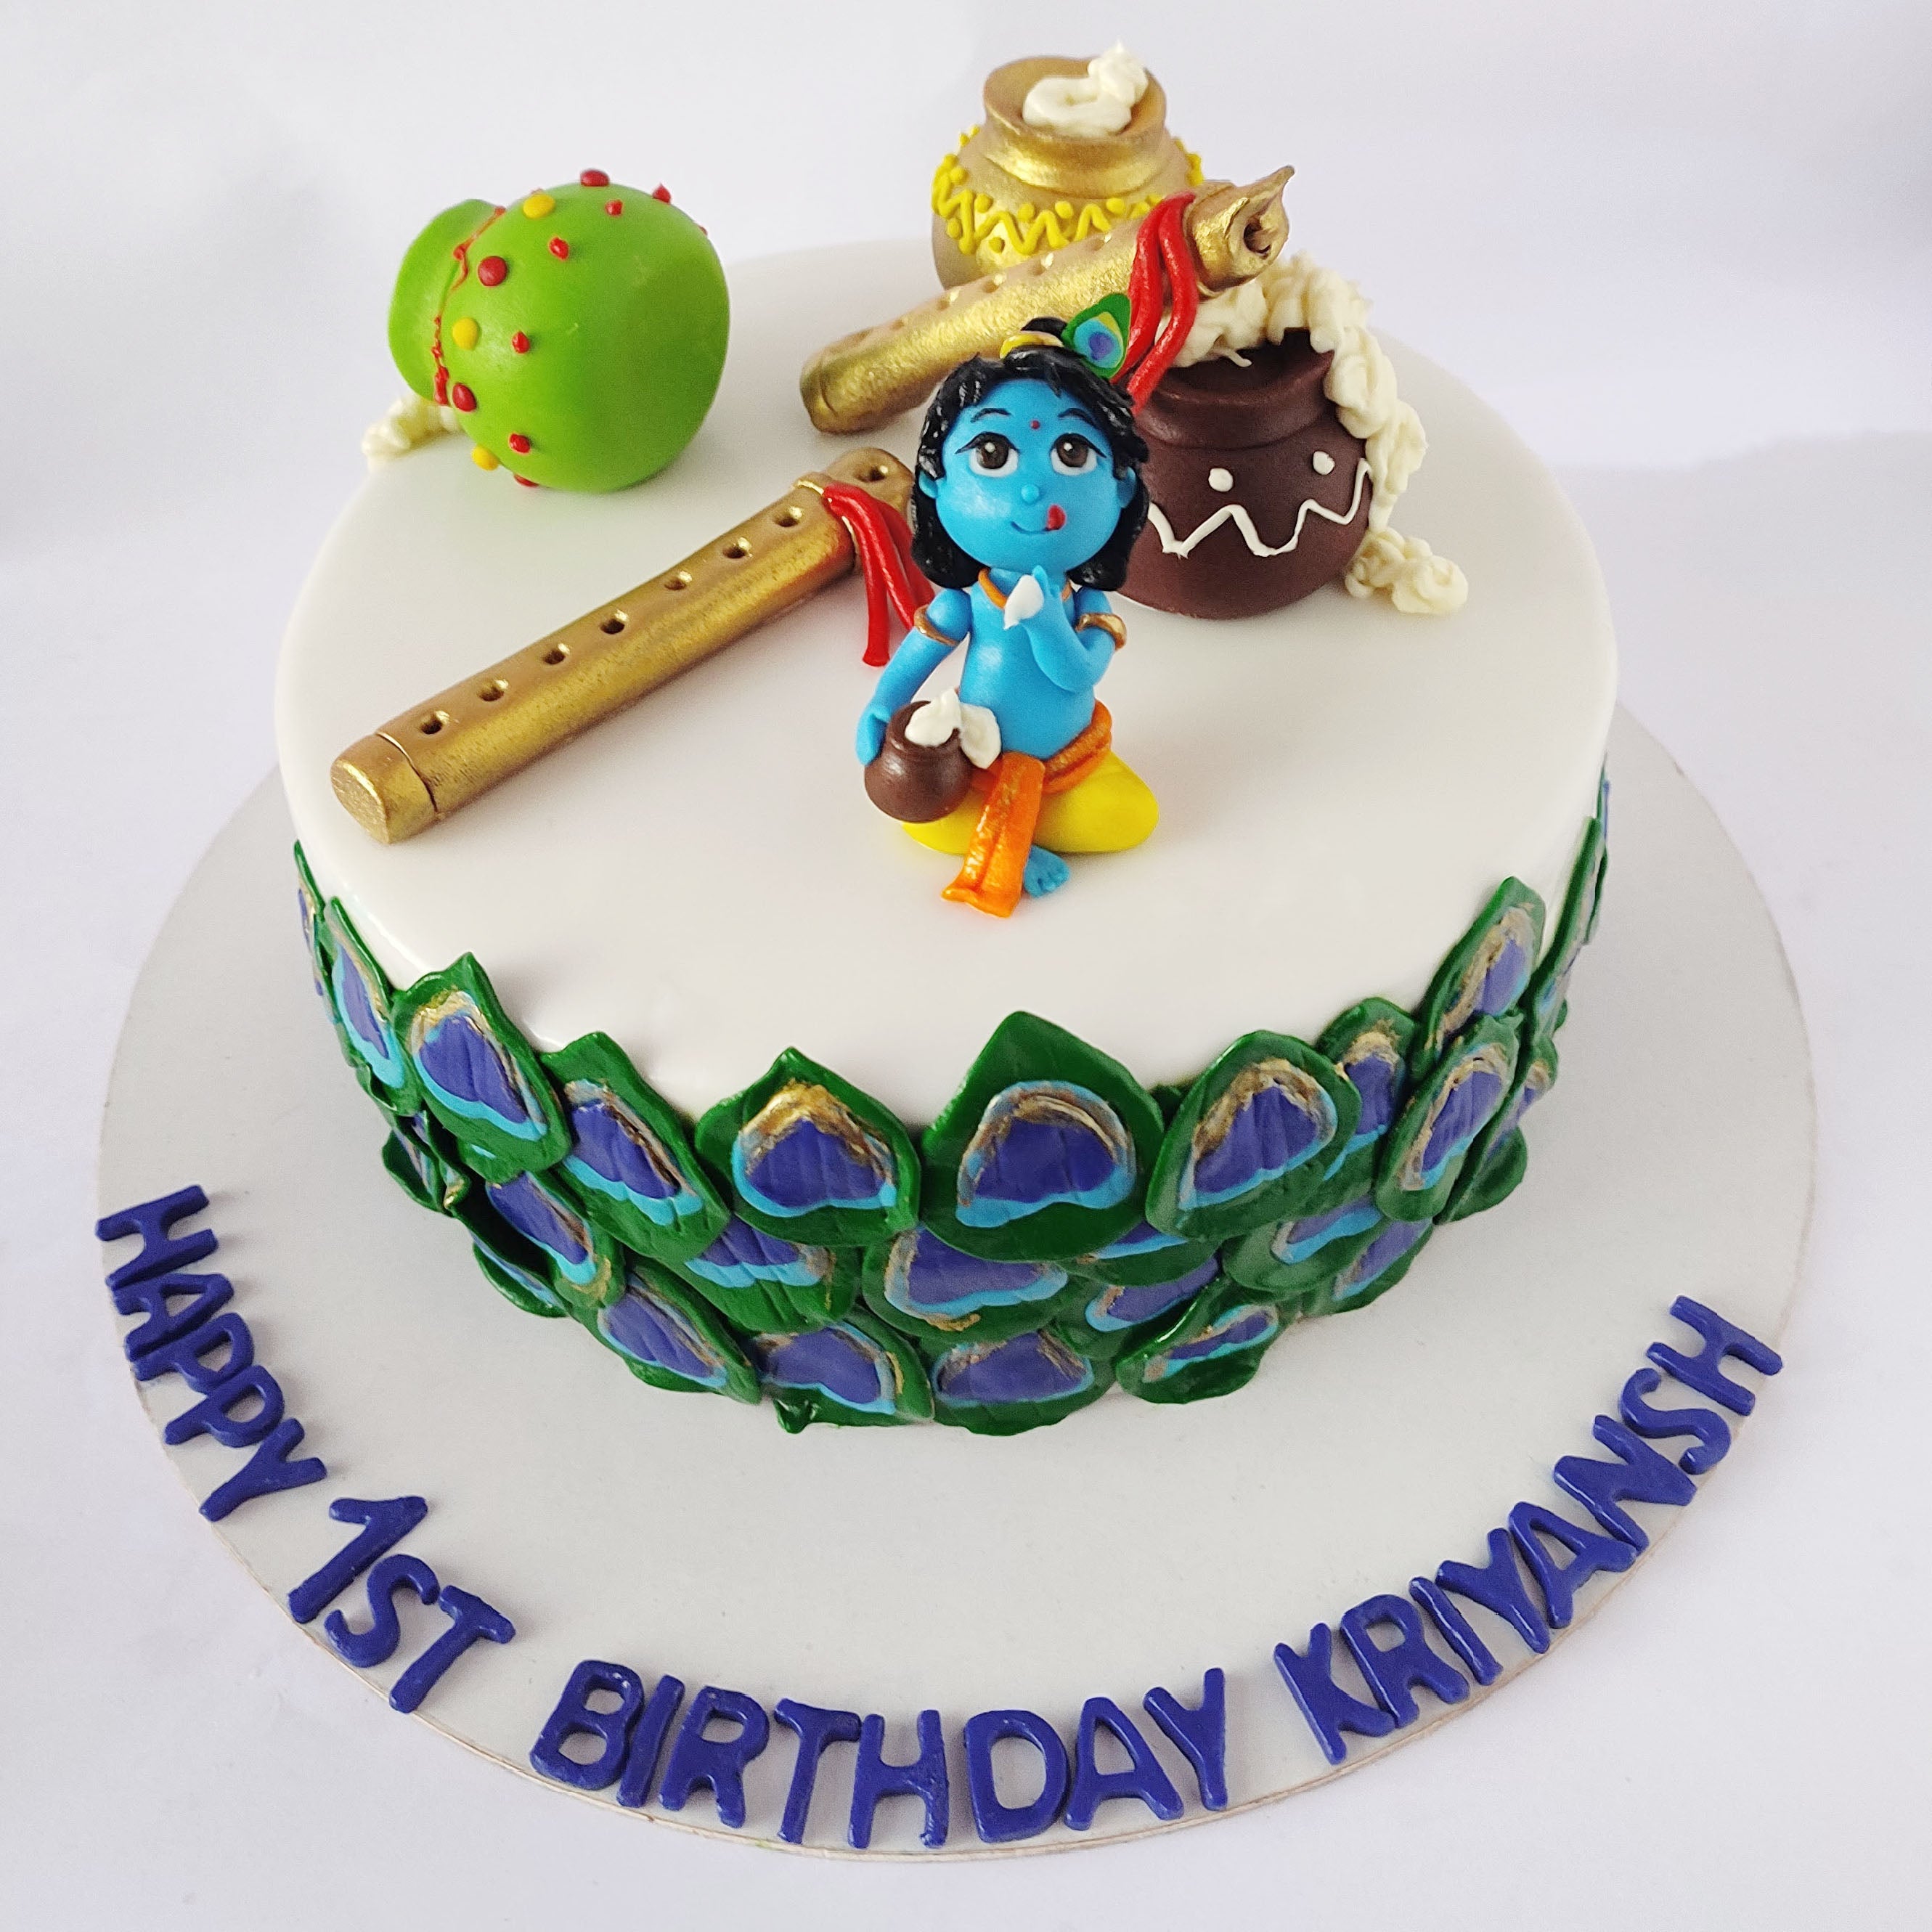 Little Krishna theme... - Vani's Creative Bakers and Events | Facebook